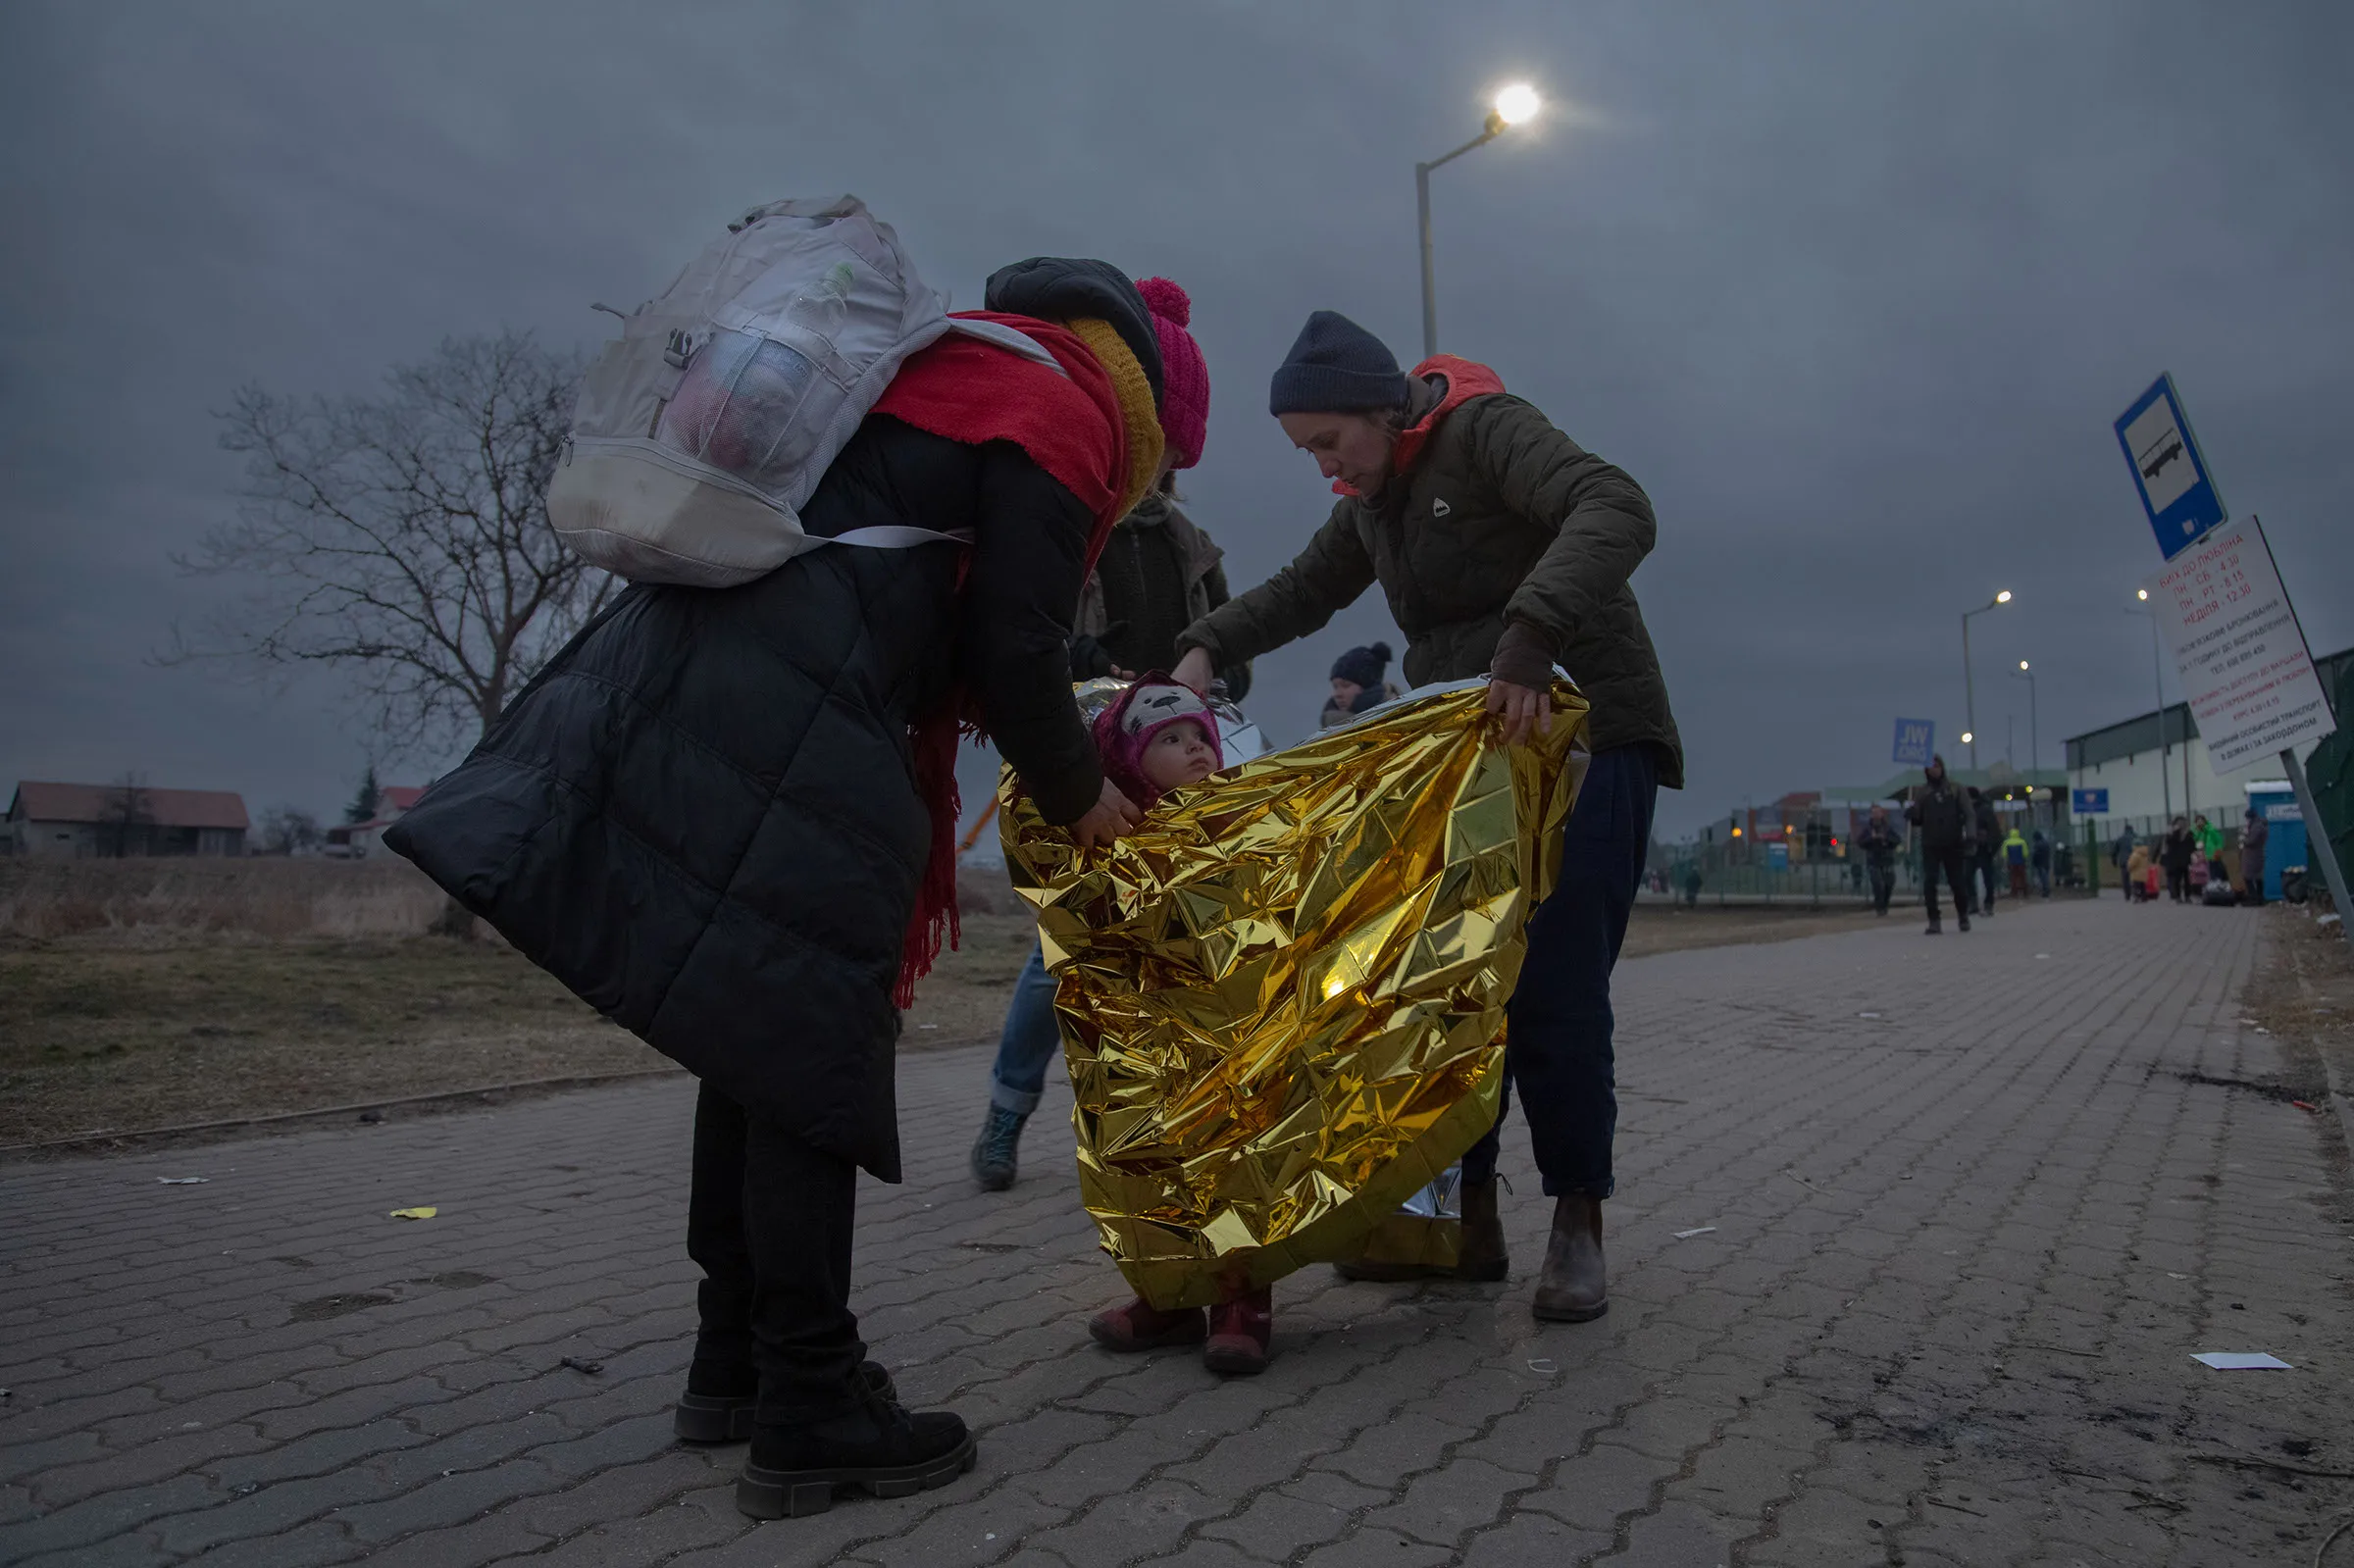 People wrapping a child in a reflective gold blanket